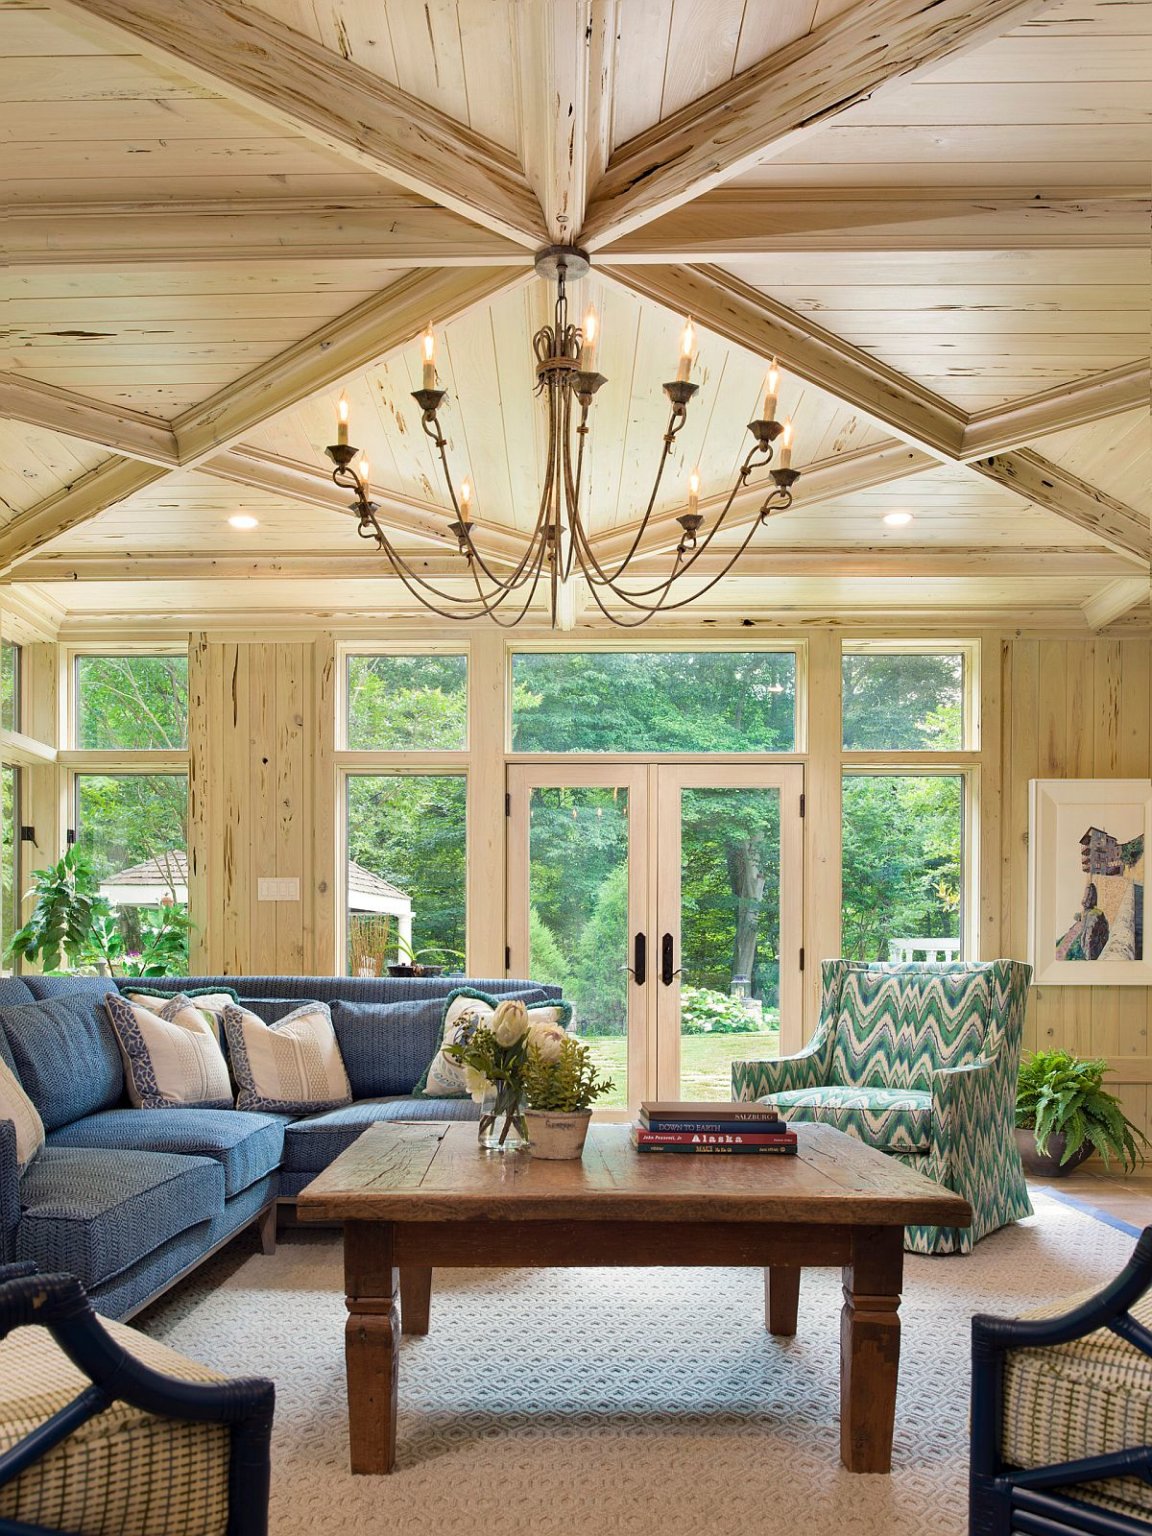 Bringing Color into the Traditional Sunroom: Bright Décor, Walls and